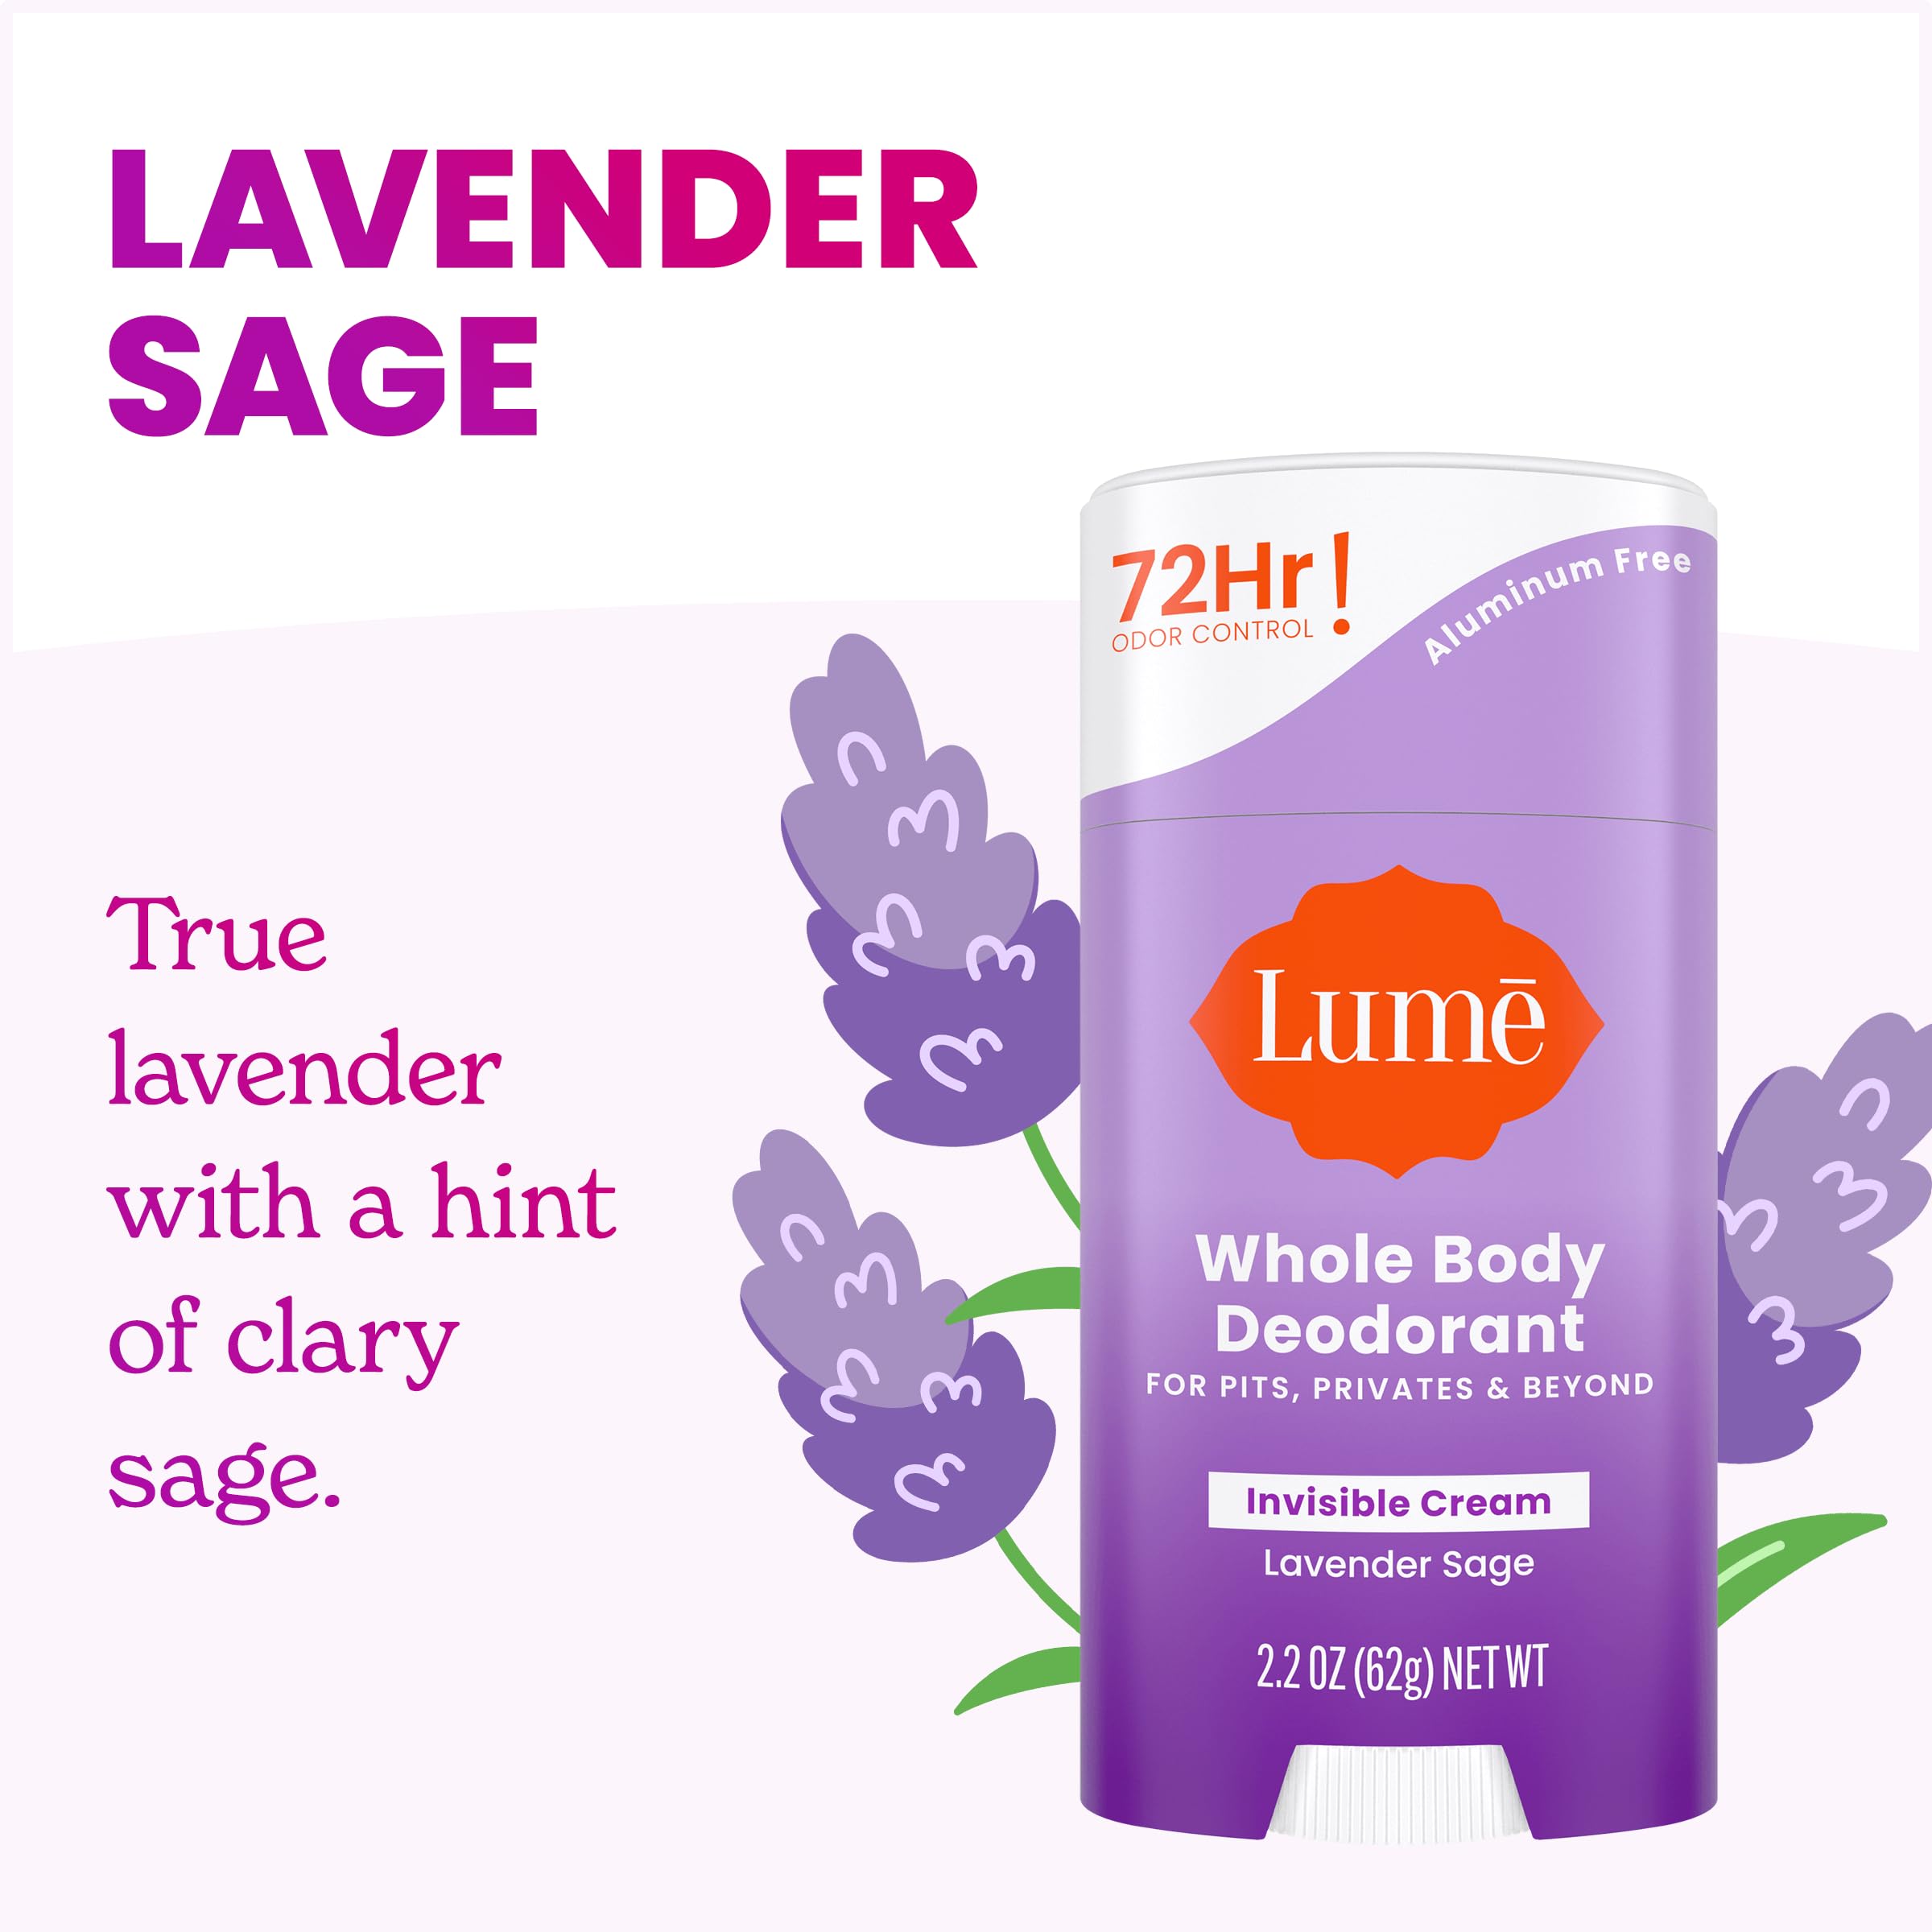 Lume Deodorant Cream Stick - Underarms and Private Parts - Aluminum-Free, Baking Soda-Free, Hypoallergenic, and Safe For Sensitive Skin - 2.2 Ounce Two-Pack (Lavender Sage)